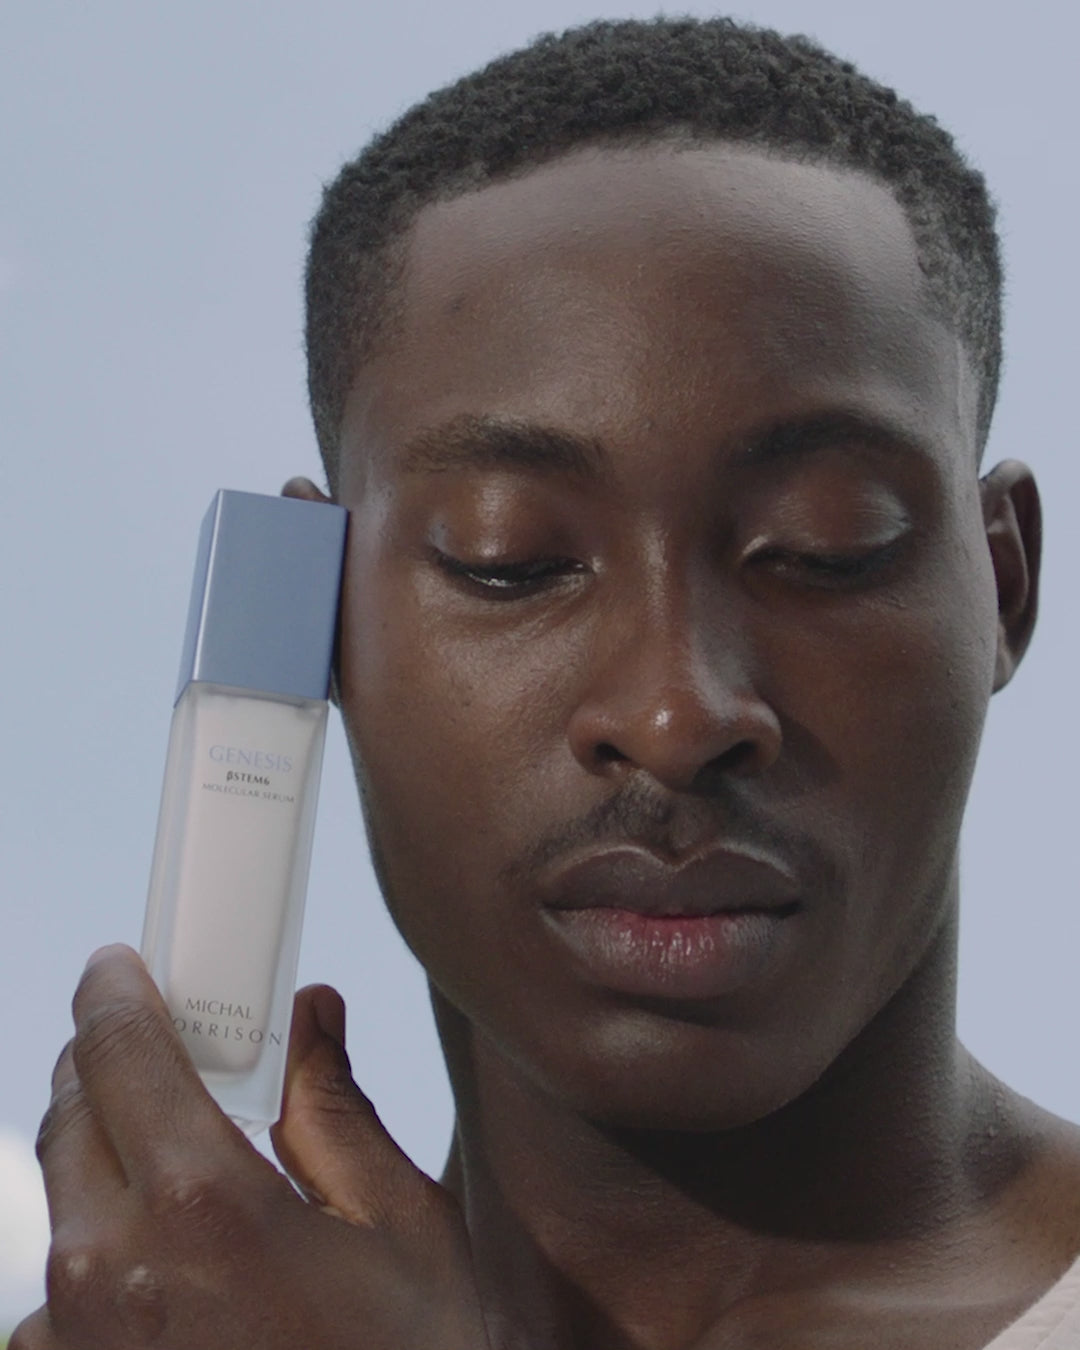 Video showing How-To instructions for using Michal Morrison Genesis BSTEM6 Molecular Serum. Video shows African American male model applying the serum, as well as close up of a set of hands pumping the serum into their palm. Video text reads, &quot;After cleansing, use one pump, Apply to skin on the face and neck, Safe to use in conjunction with any actives such as retinoids and Vitamin C, Radiant. Revitalized. Renewed., Michal Morrison, Where Beauty Begins.&quot;